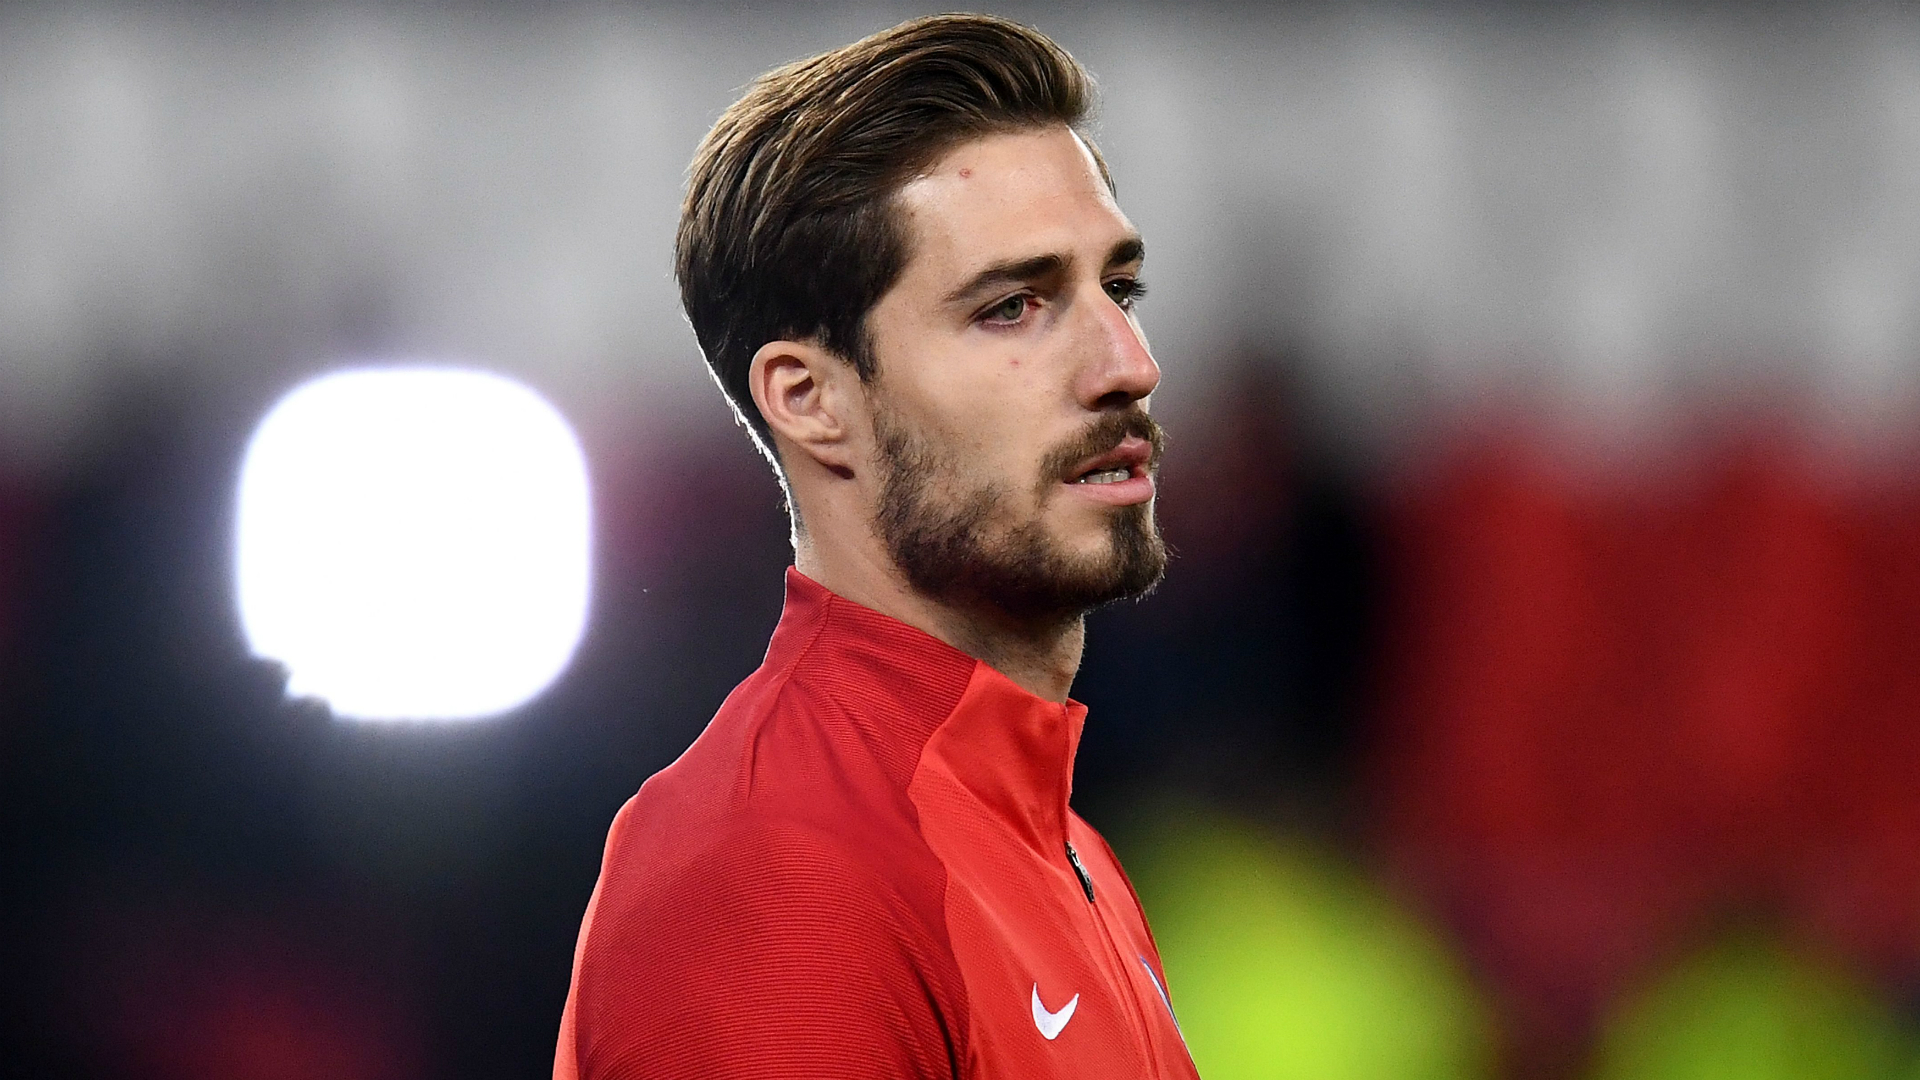 Trapp wants to stay at PSG amid Premier League links